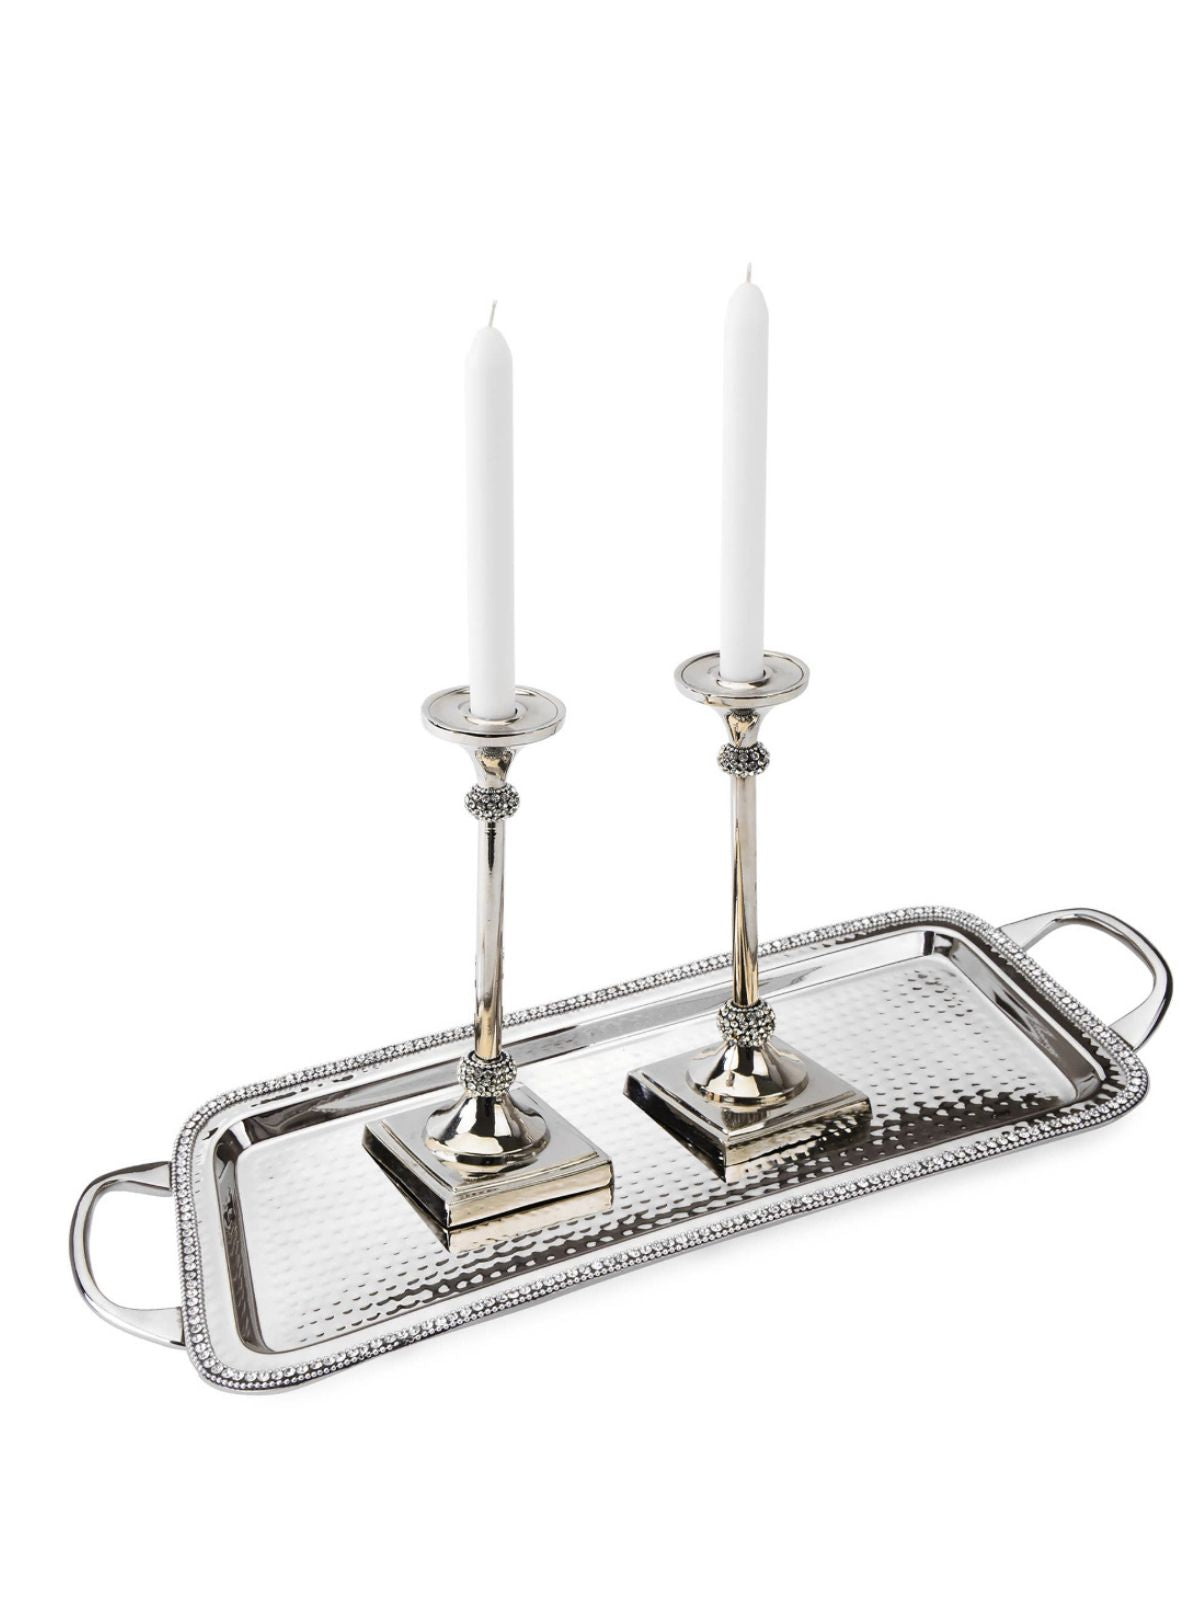 Hammered Stainless Steel Candlestick Holders With Sparkling Diamond Stones, Available in 2 Sizes. 